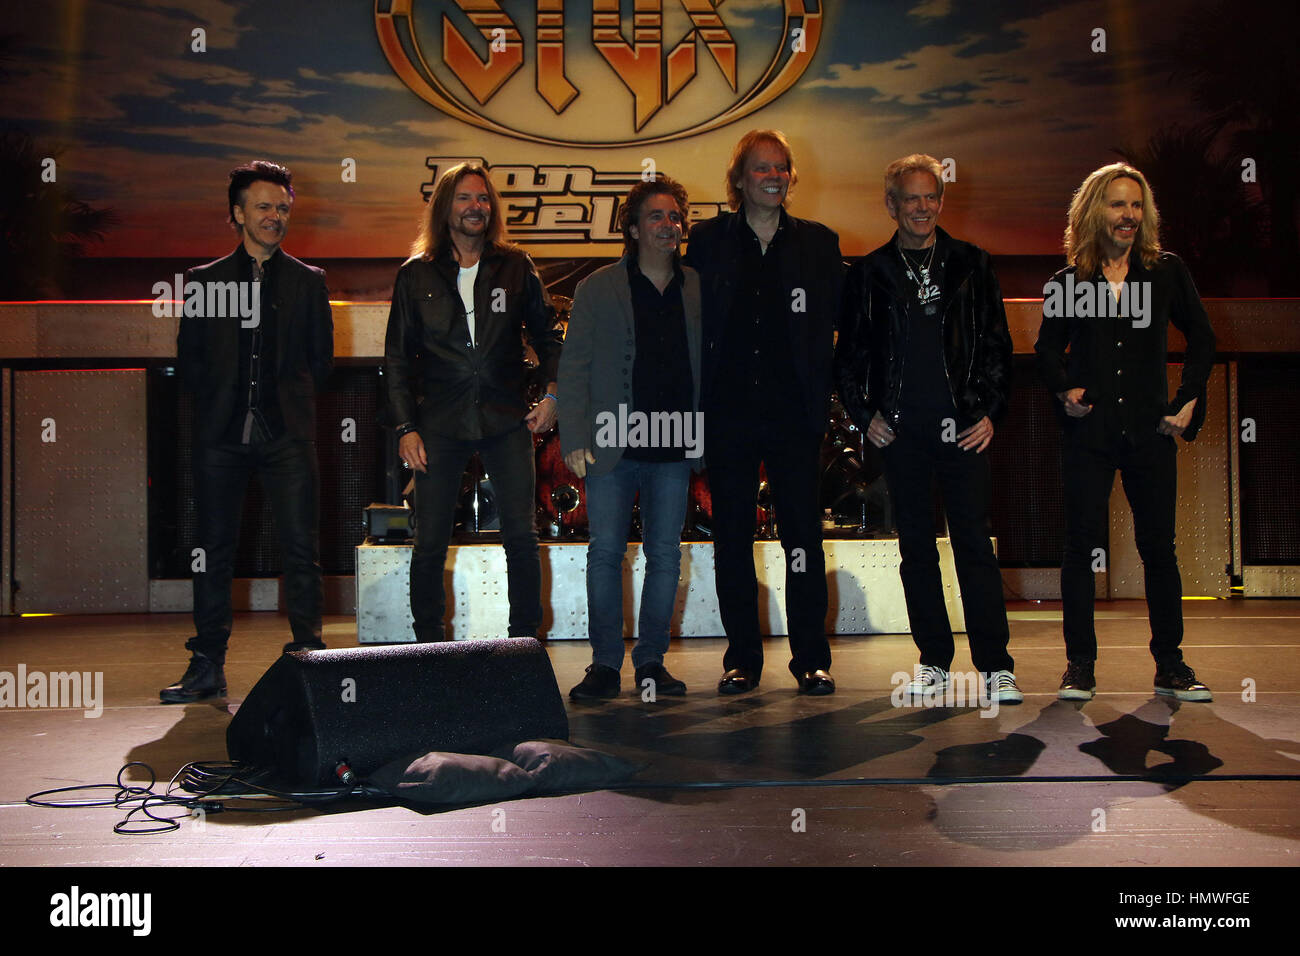 Styx and Don Felder kick off their Renegades in the Fast Lane performance held at The Venetian Theatre inside the Venetian Hotel and Casino  Featuring: Styx, Don Felder Where: Las Vegas, Nevada, United States When: 06 Jan 2017 Credit: DJDM/WENN.com Stock Photo